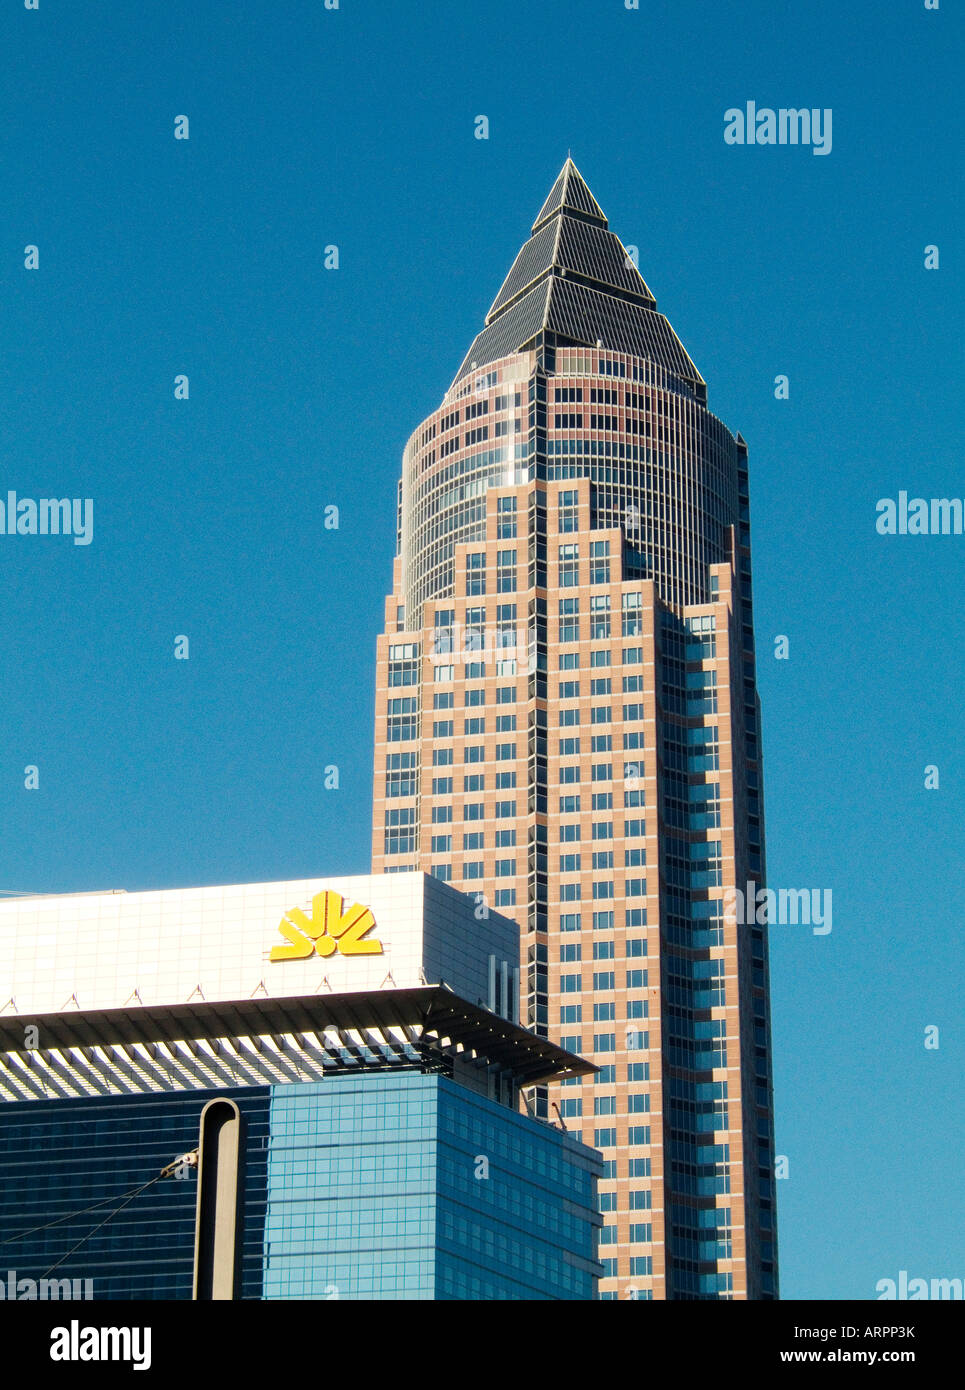 The MesseTurm or Trade Fair Tower seen behind the Commerzbank in the Messegelande complex in central area of Frankfurt, Germany Stock Photo